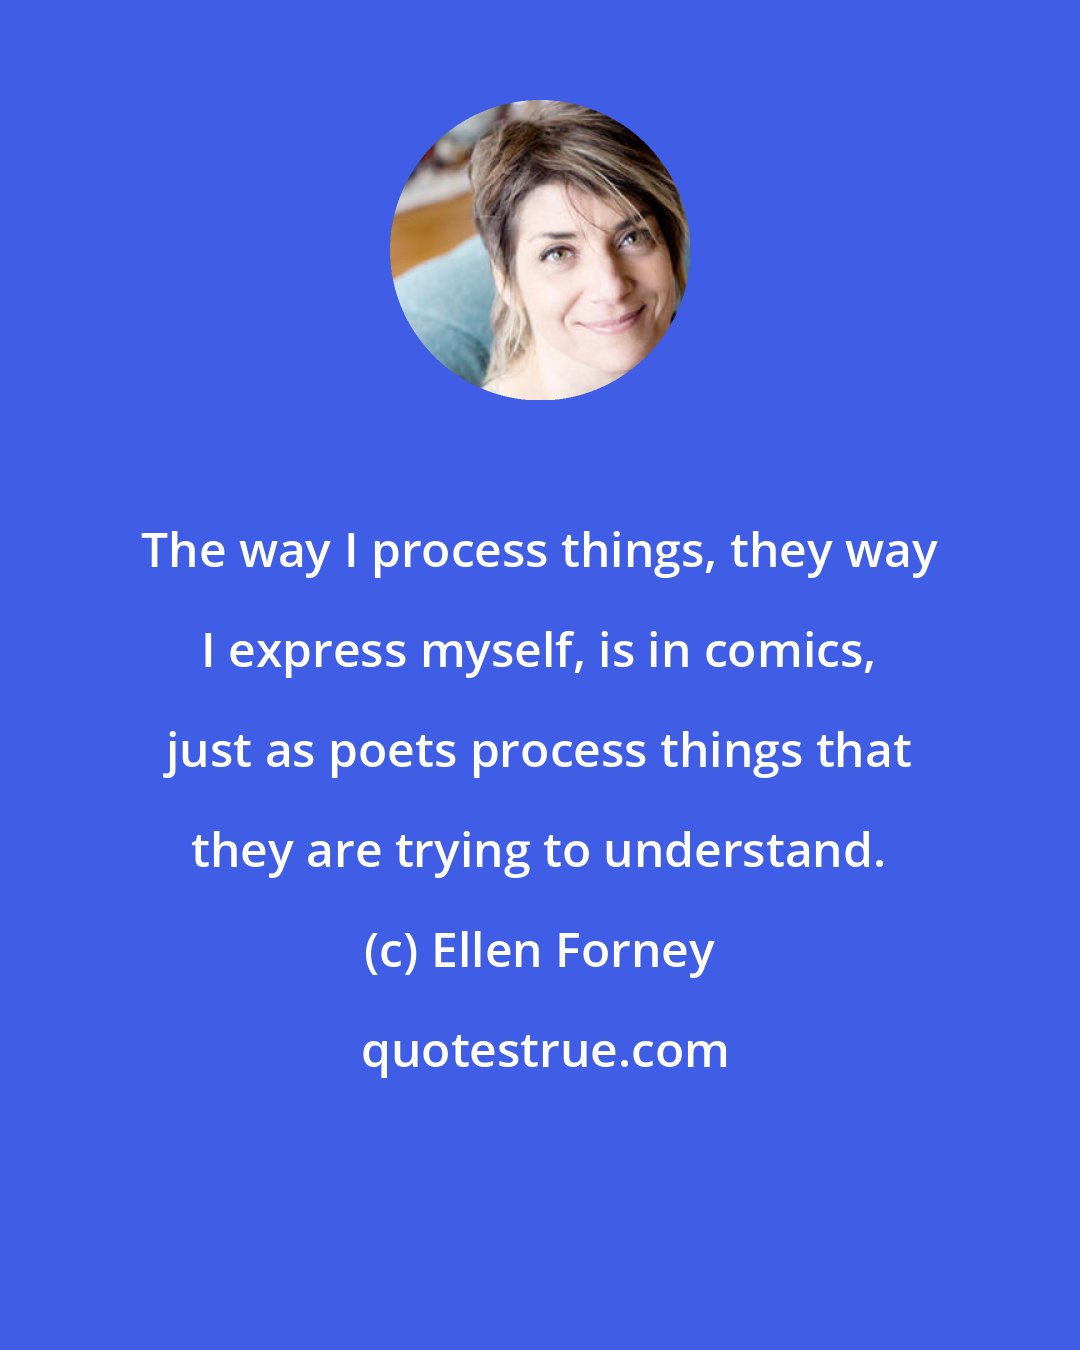 Ellen Forney: The way I process things, they way I express myself, is in comics, just as poets process things that they are trying to understand.